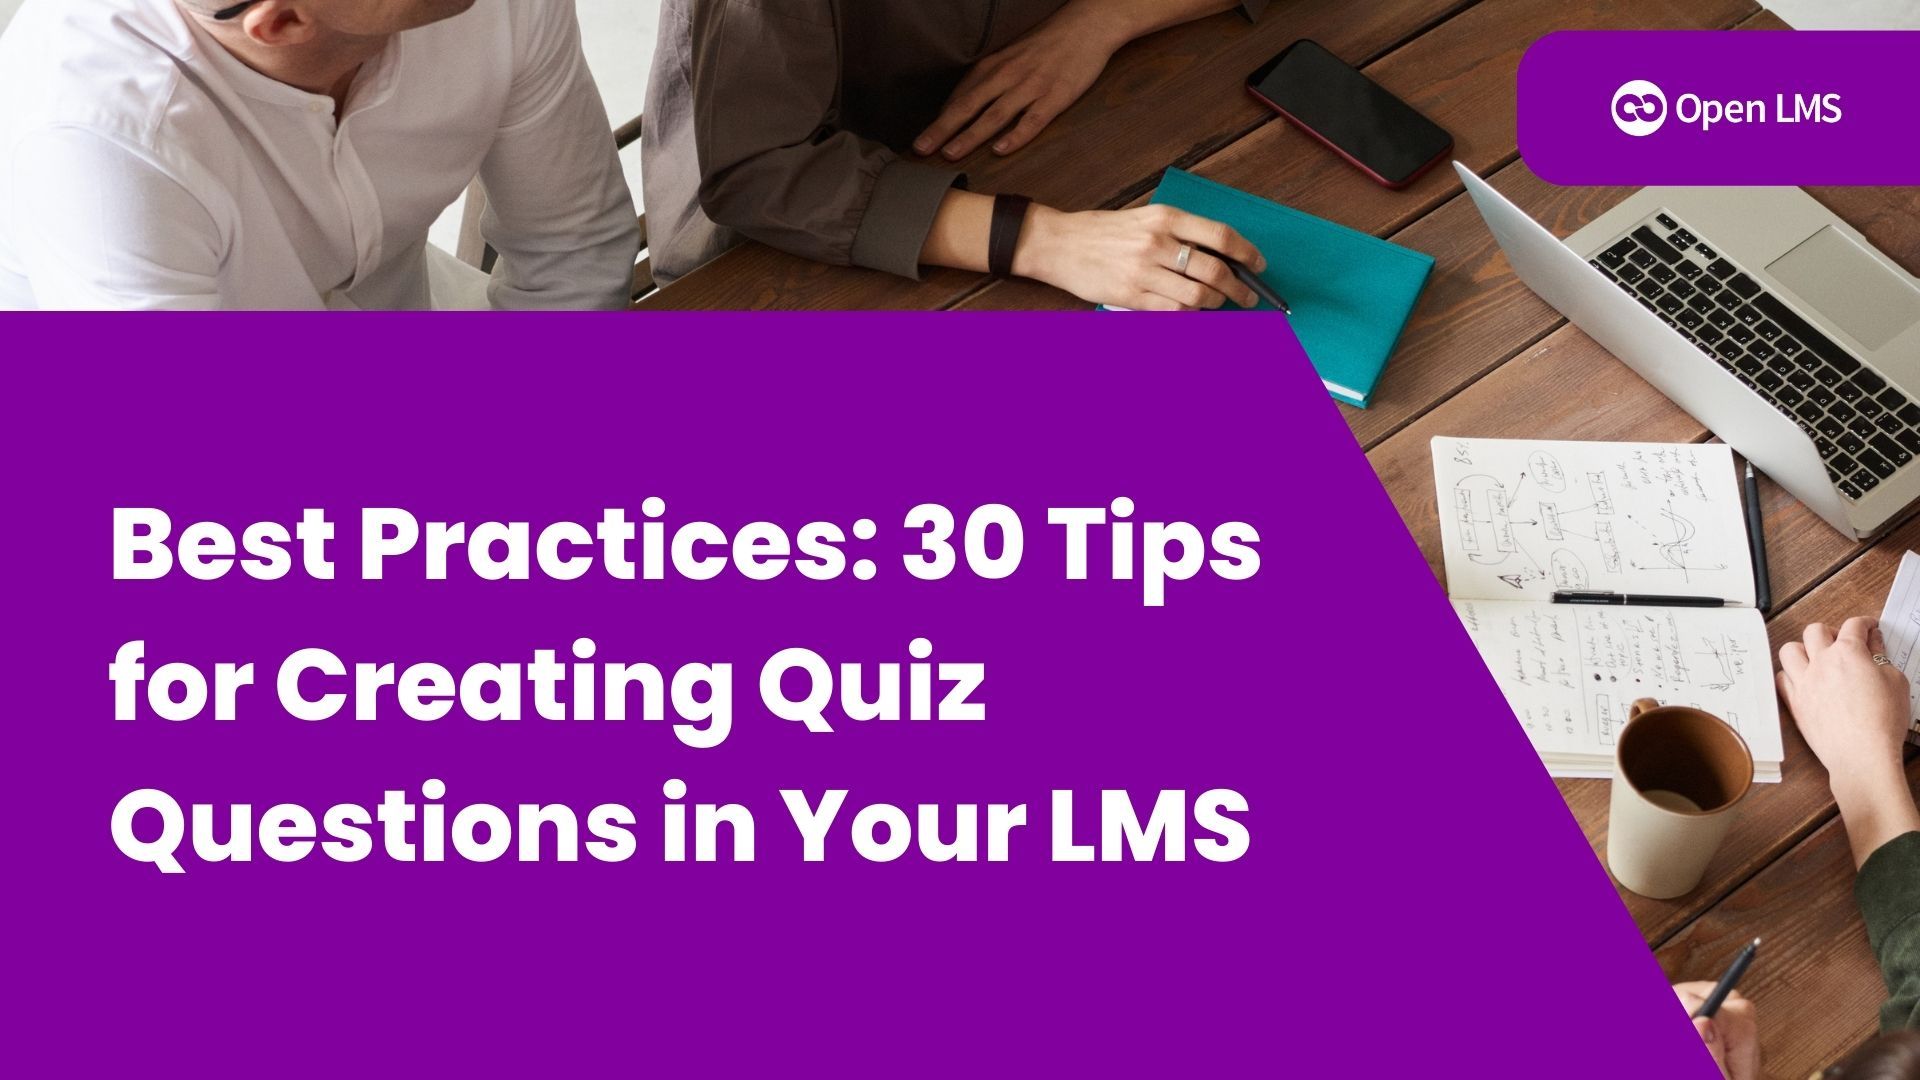 Best practices: 30 tips for creating quiz questions